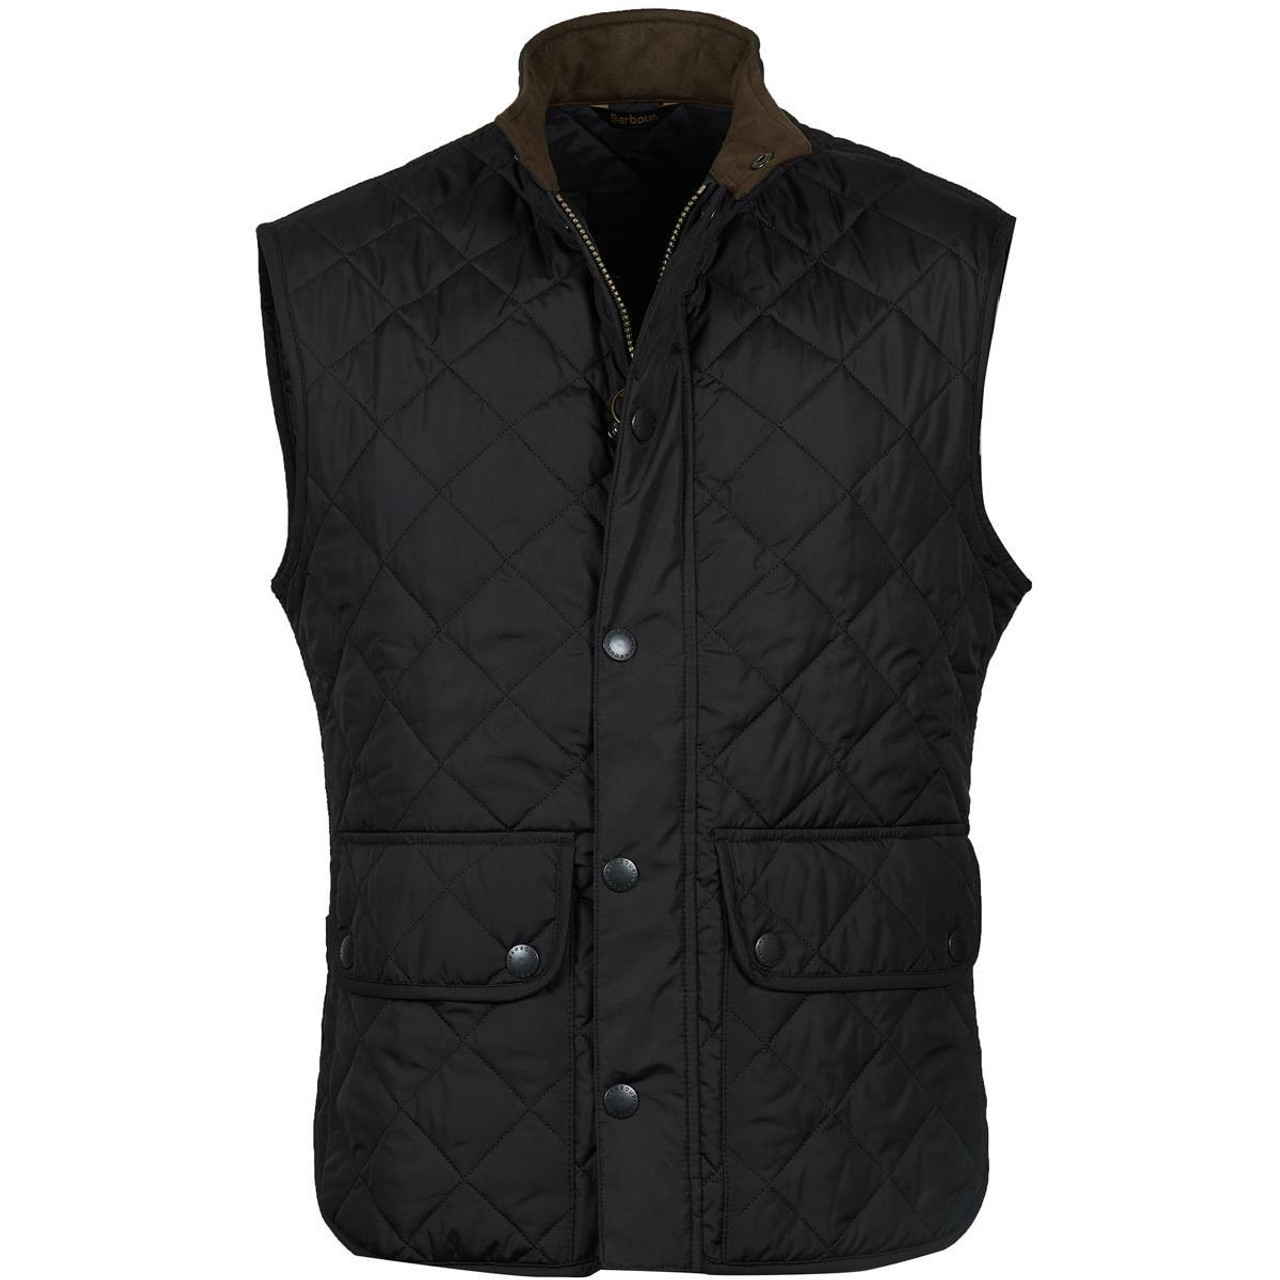 How to modify the fit of the Barbour Lowerdale Gilet?